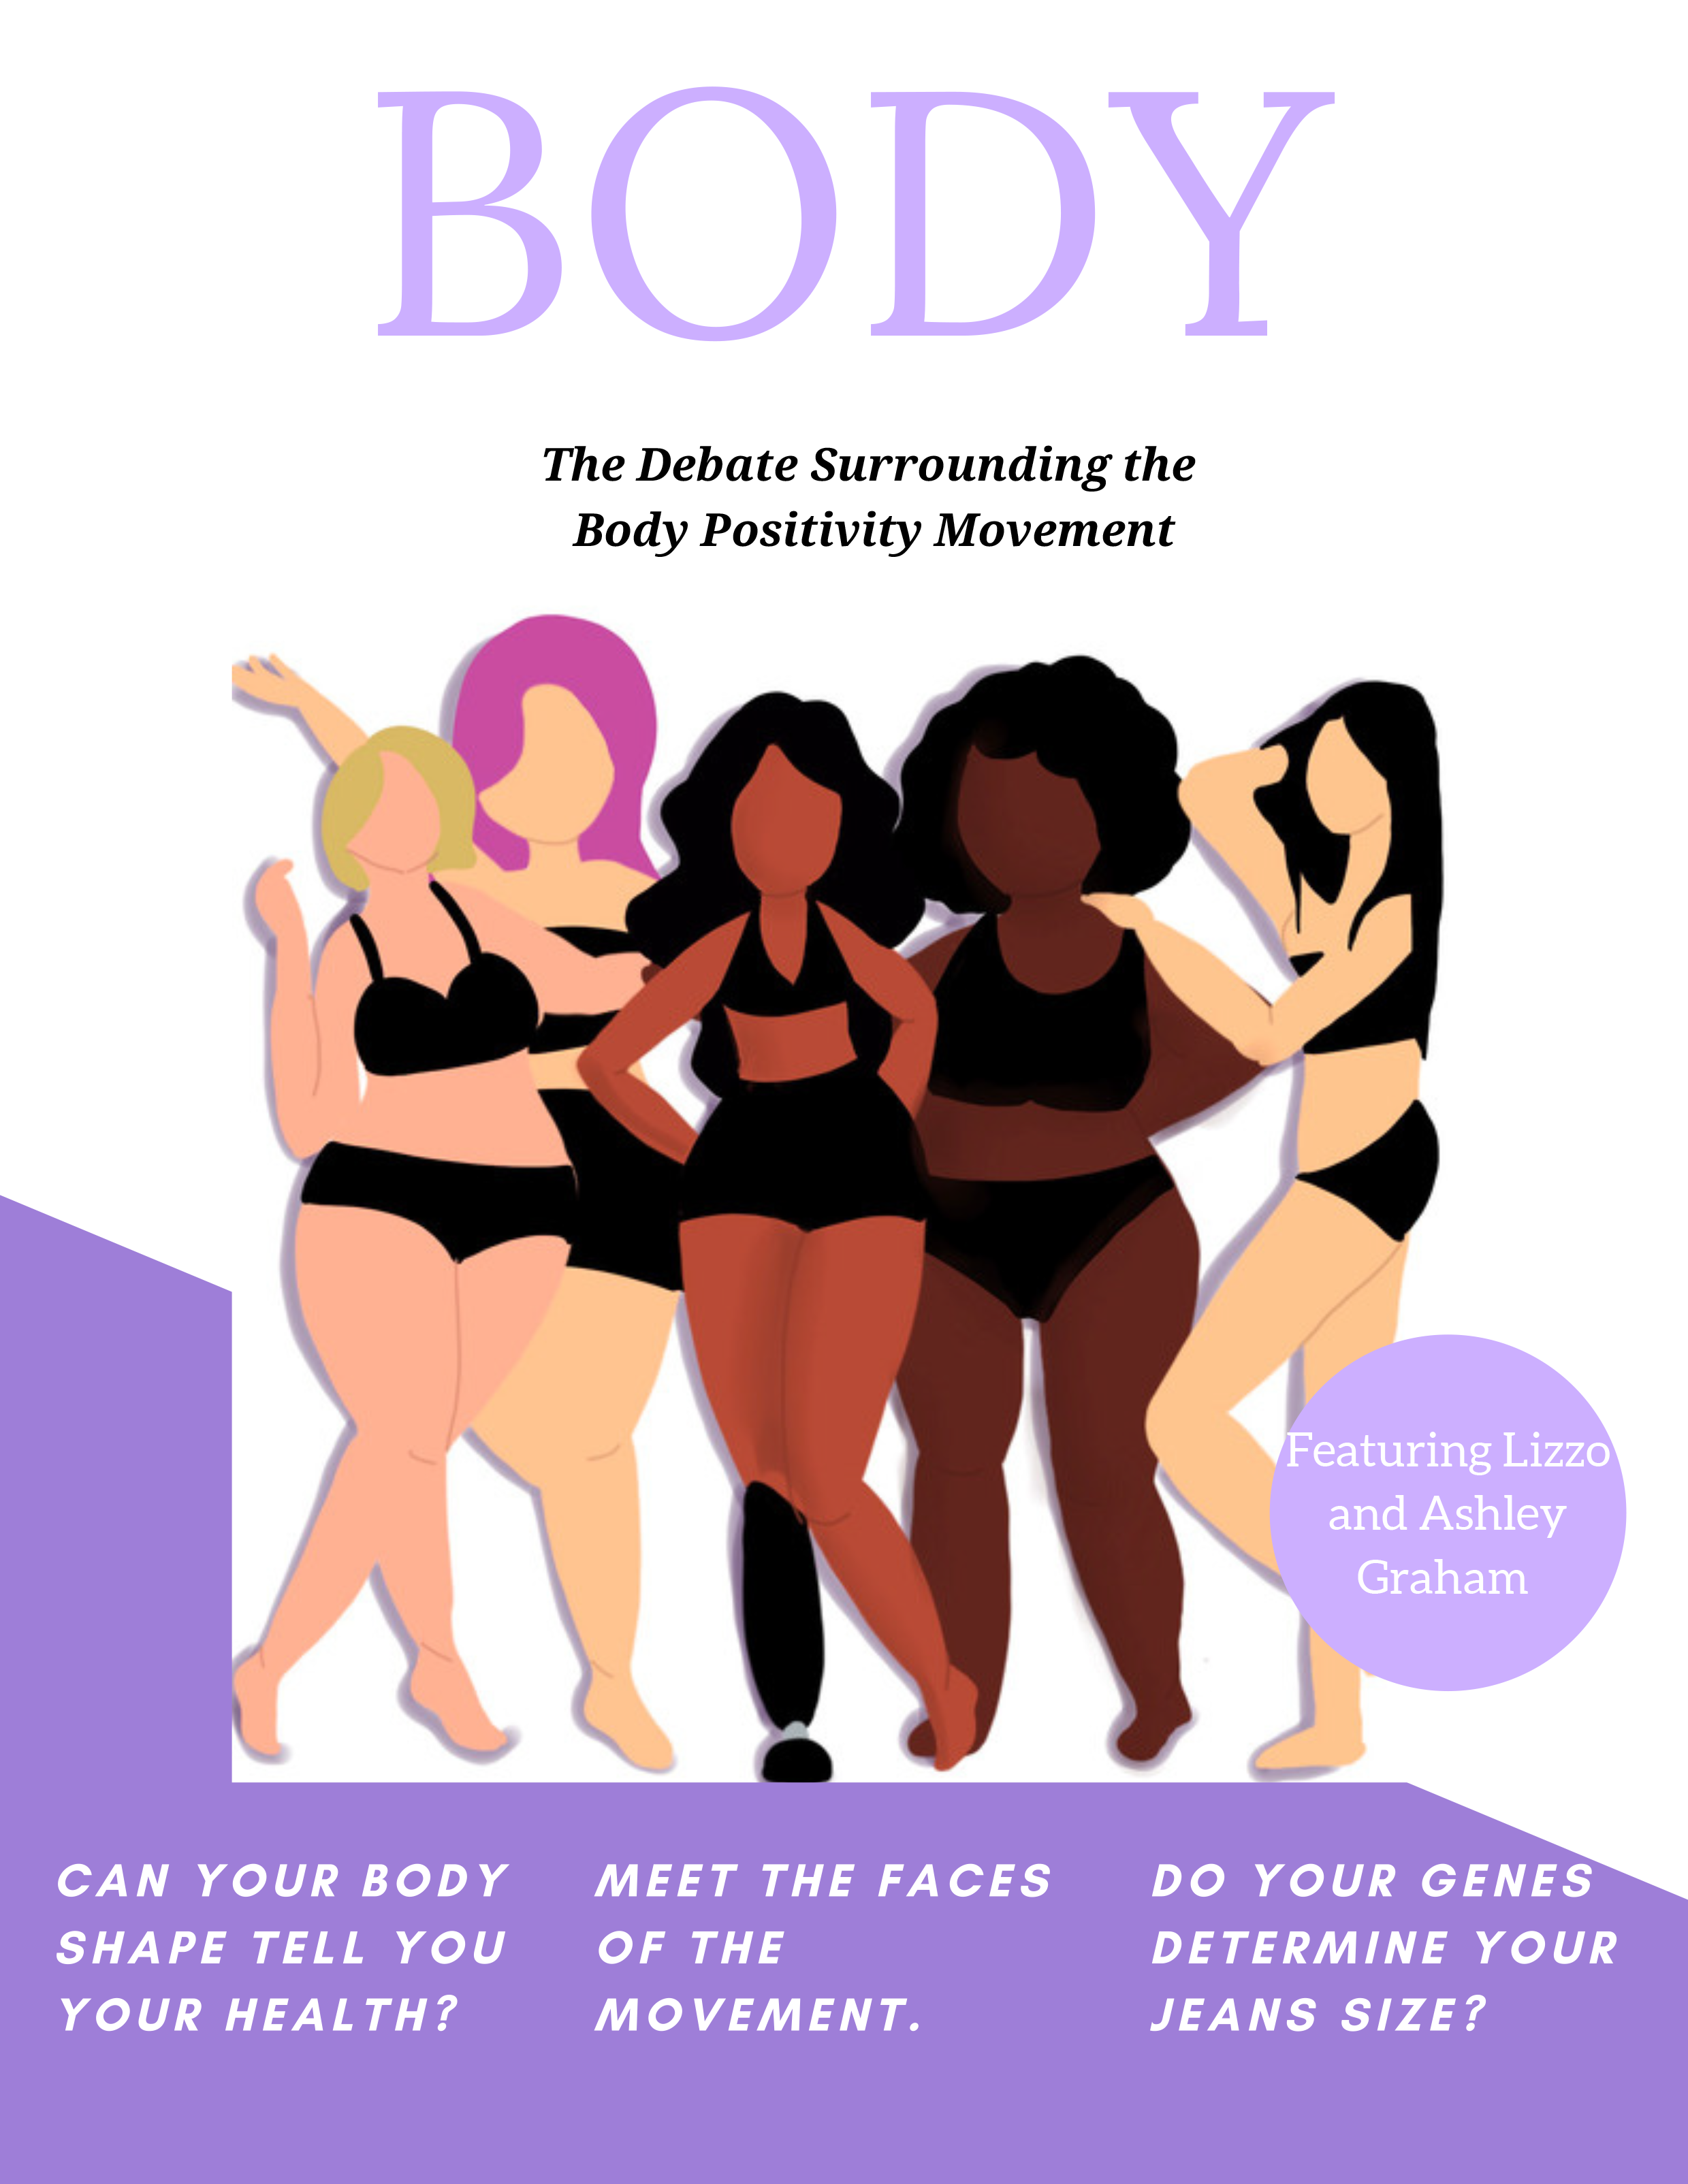 https://thehbsway.rocks/images/21W-images/BodyPositivity-Cover.png